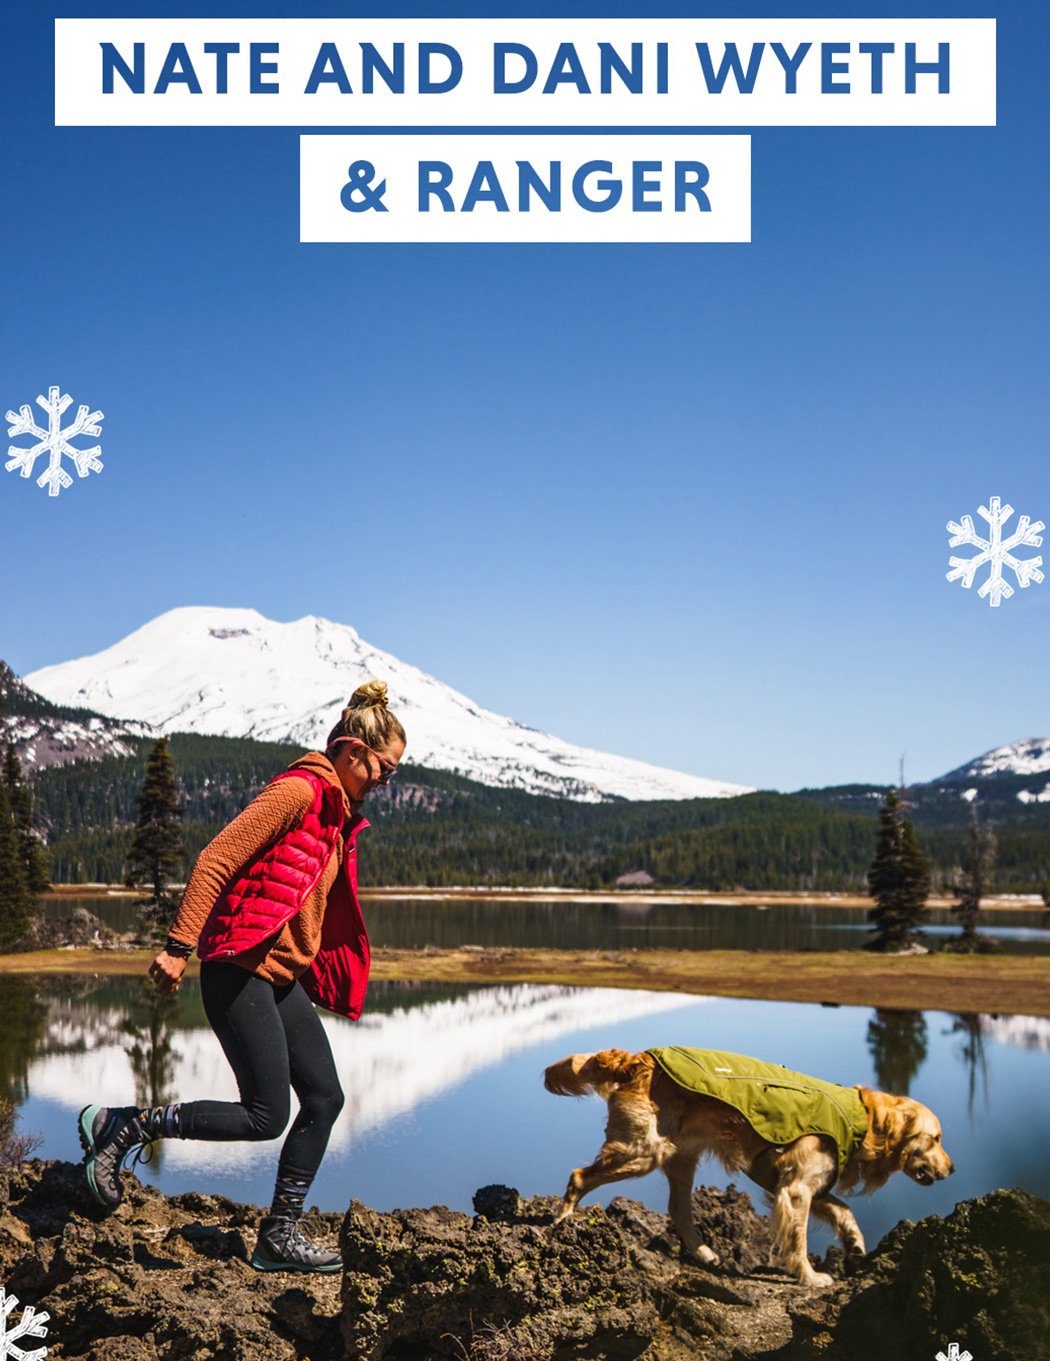 Read Nate's, Dani's, and Ranger's Holiday Inspiration